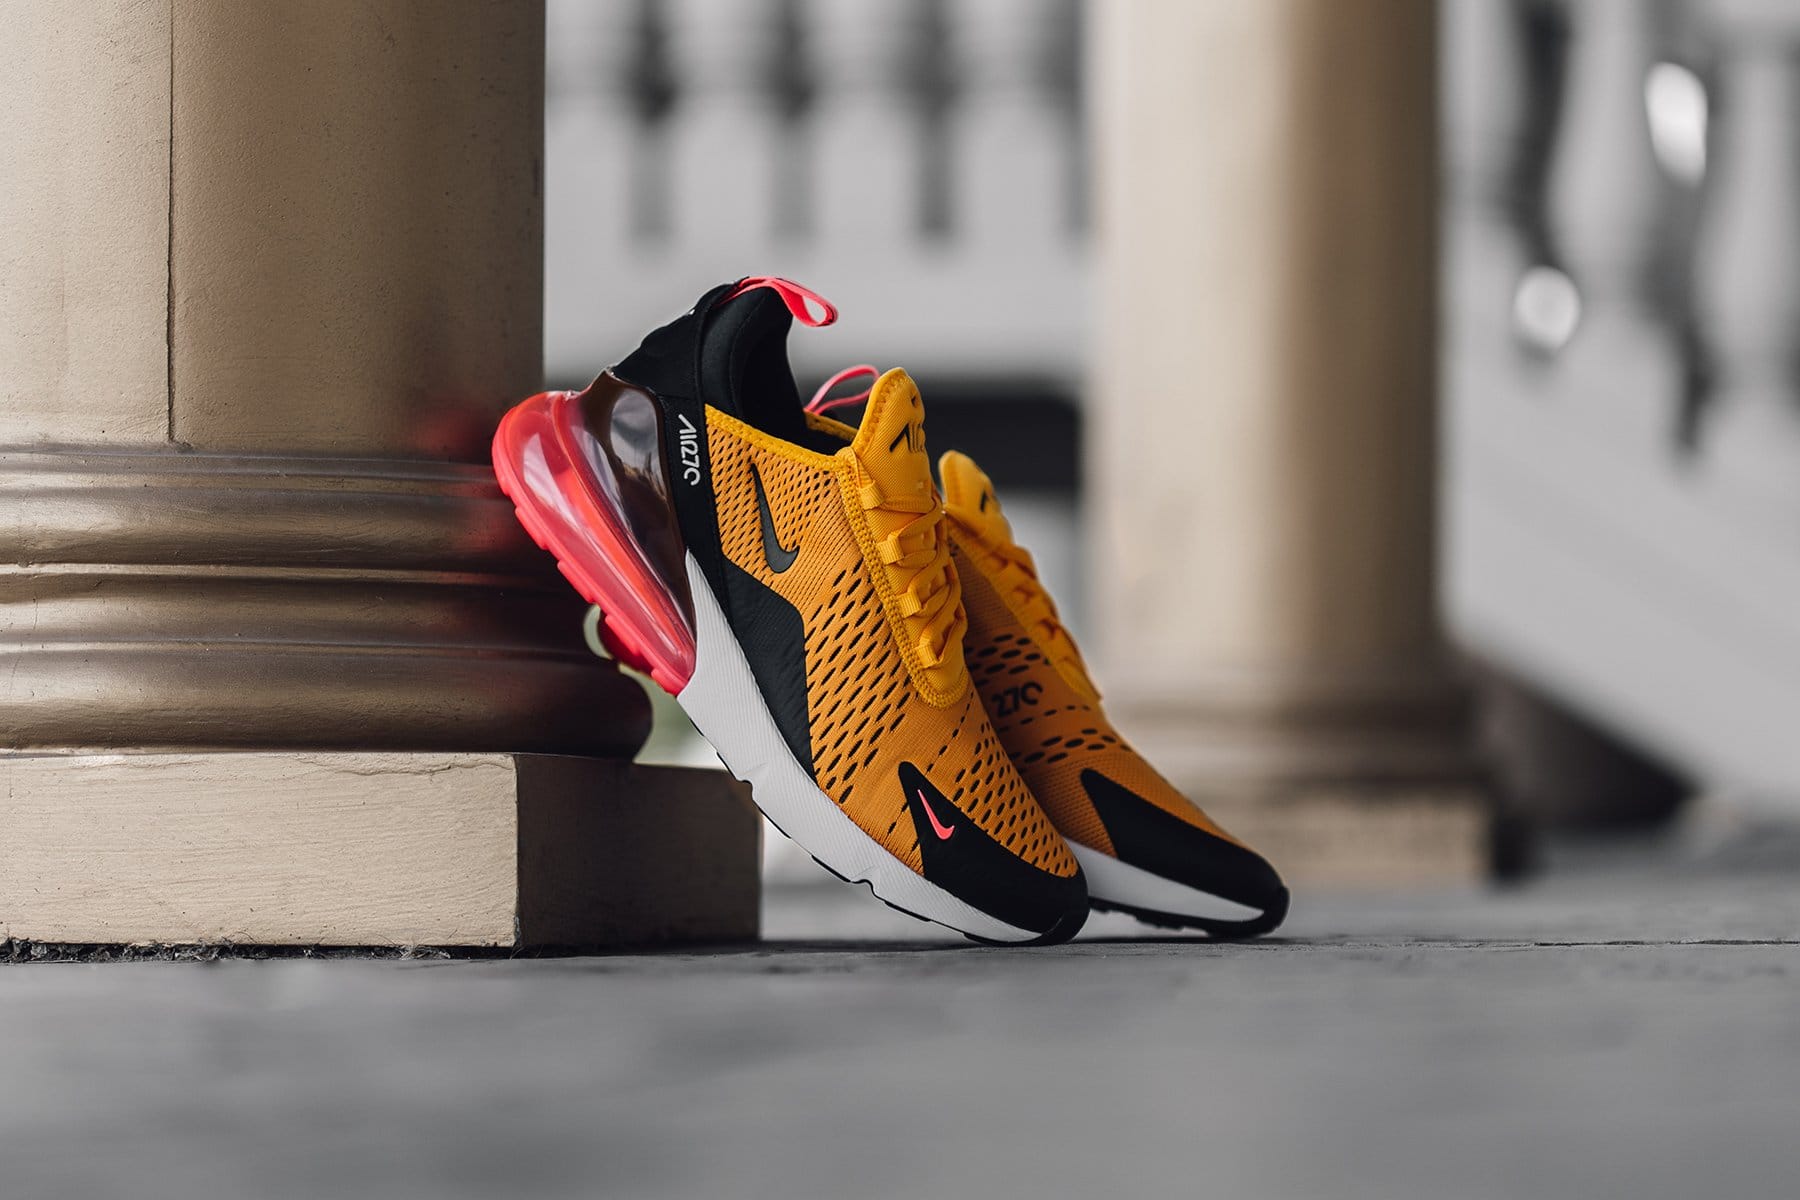 Nike Air Max 270 University Gold march 16 2018 release date info sneakers shoes footwear feature